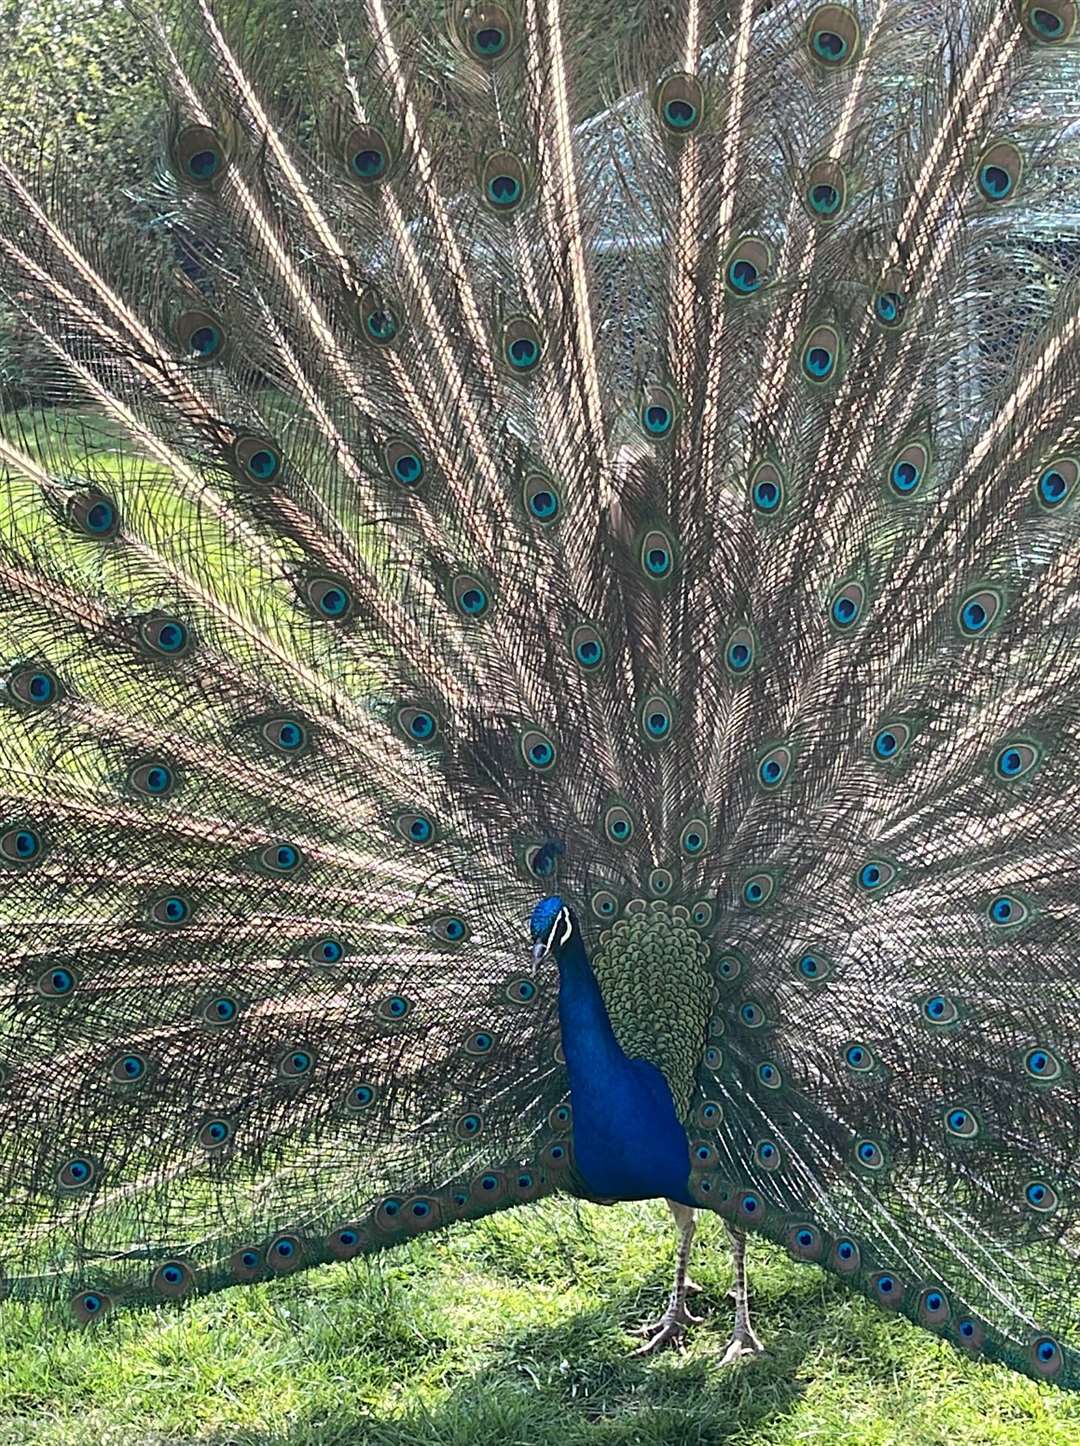 Pet peacock named River, had been brutally killed by teenagers with catapults in Boughton Monchelsea